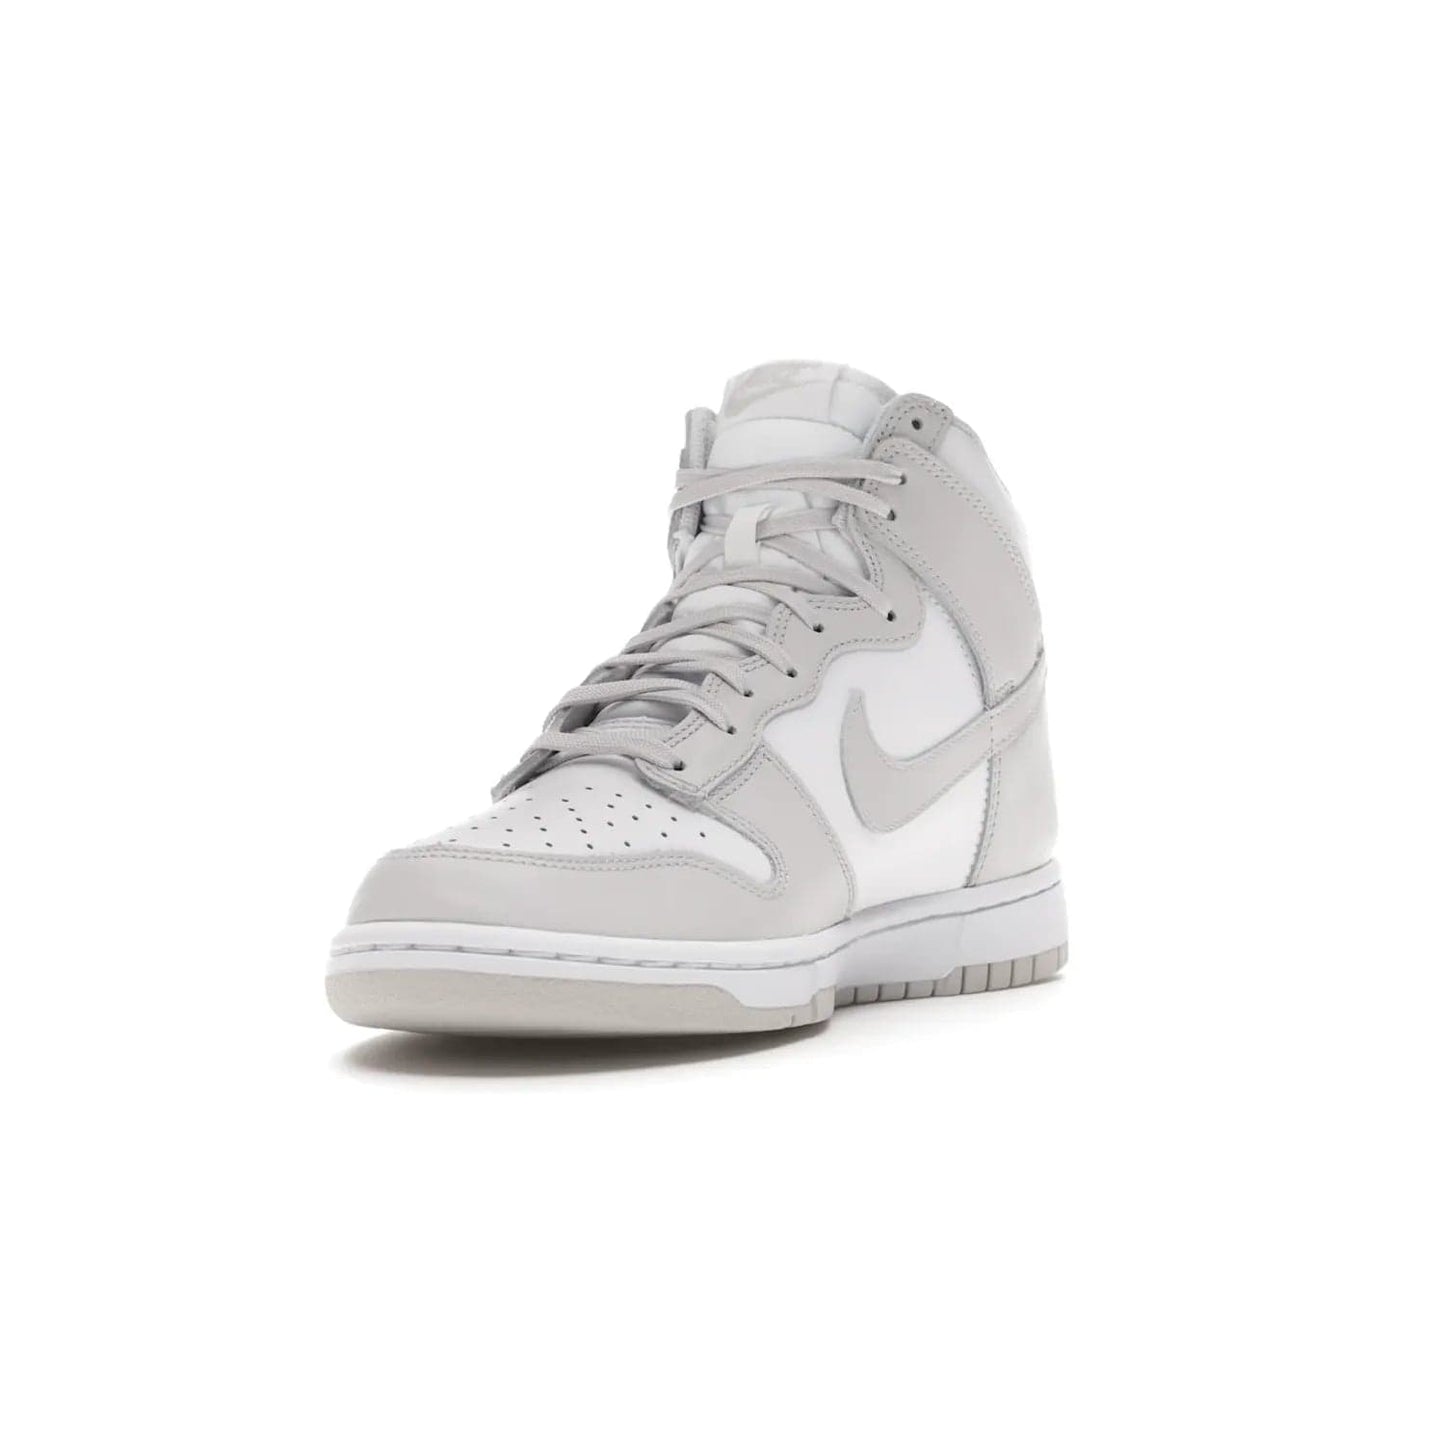 Nike Dunk High Retro White Vast Grey (2021) - Image 13 - Only at www.BallersClubKickz.com - Nike Dunk High Retro White Vast Grey 2021: classic '80s basketball sneaker with a crisp white base, grey overlays, midsole tooling and outsole. Dropped Feb. 2021.